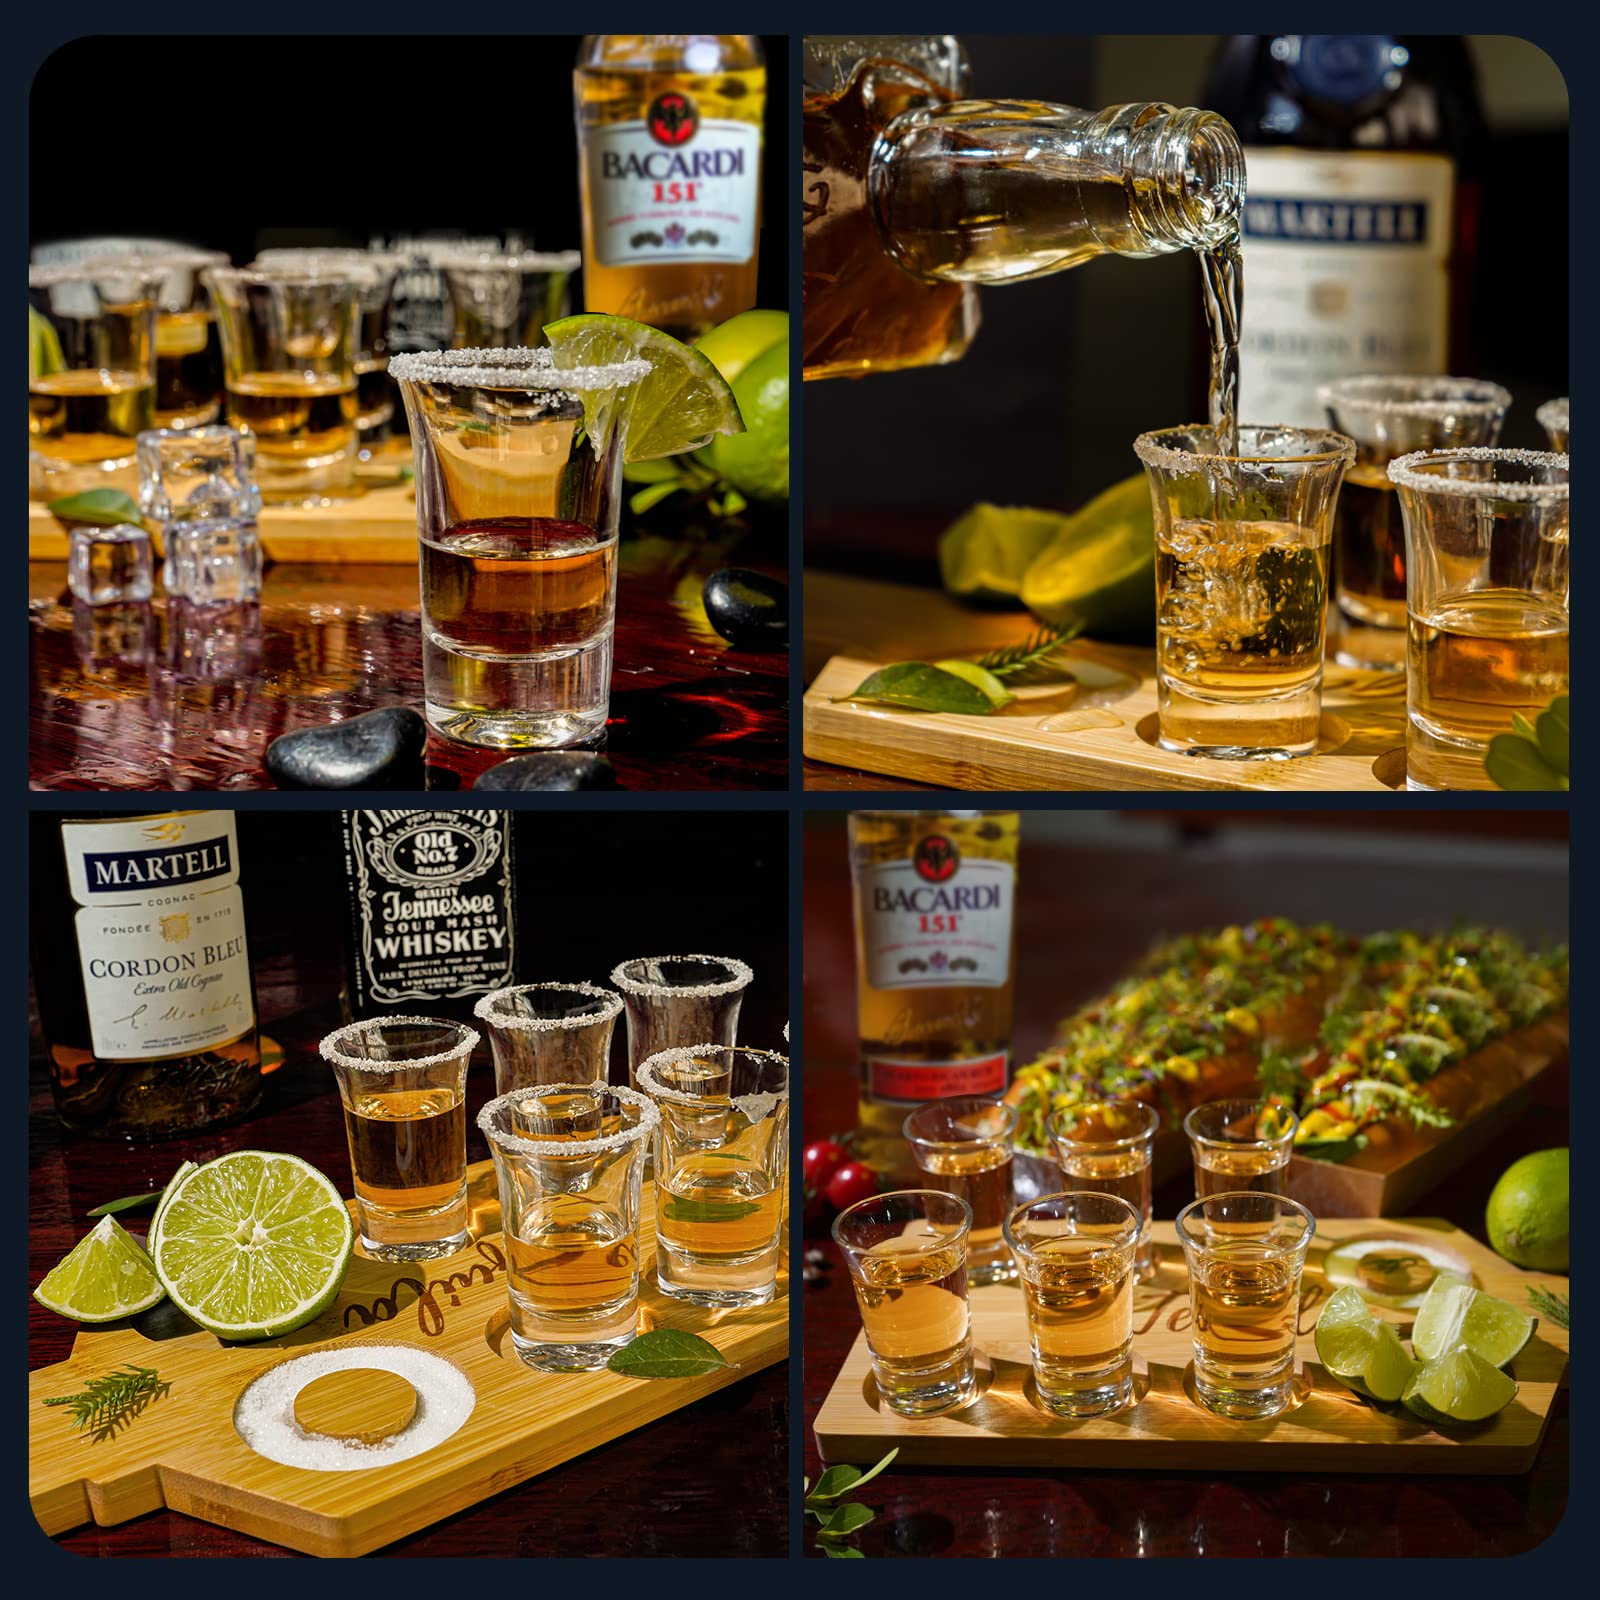 LOBUBT Tequila Shot Board Shot Glasses Display Case with Salt Rim Wooden Serving Tray for Whiskey,Tequila,Vodka,Espresso,Liqueurs, Party & Collection Housewarming,Christmas Gifts